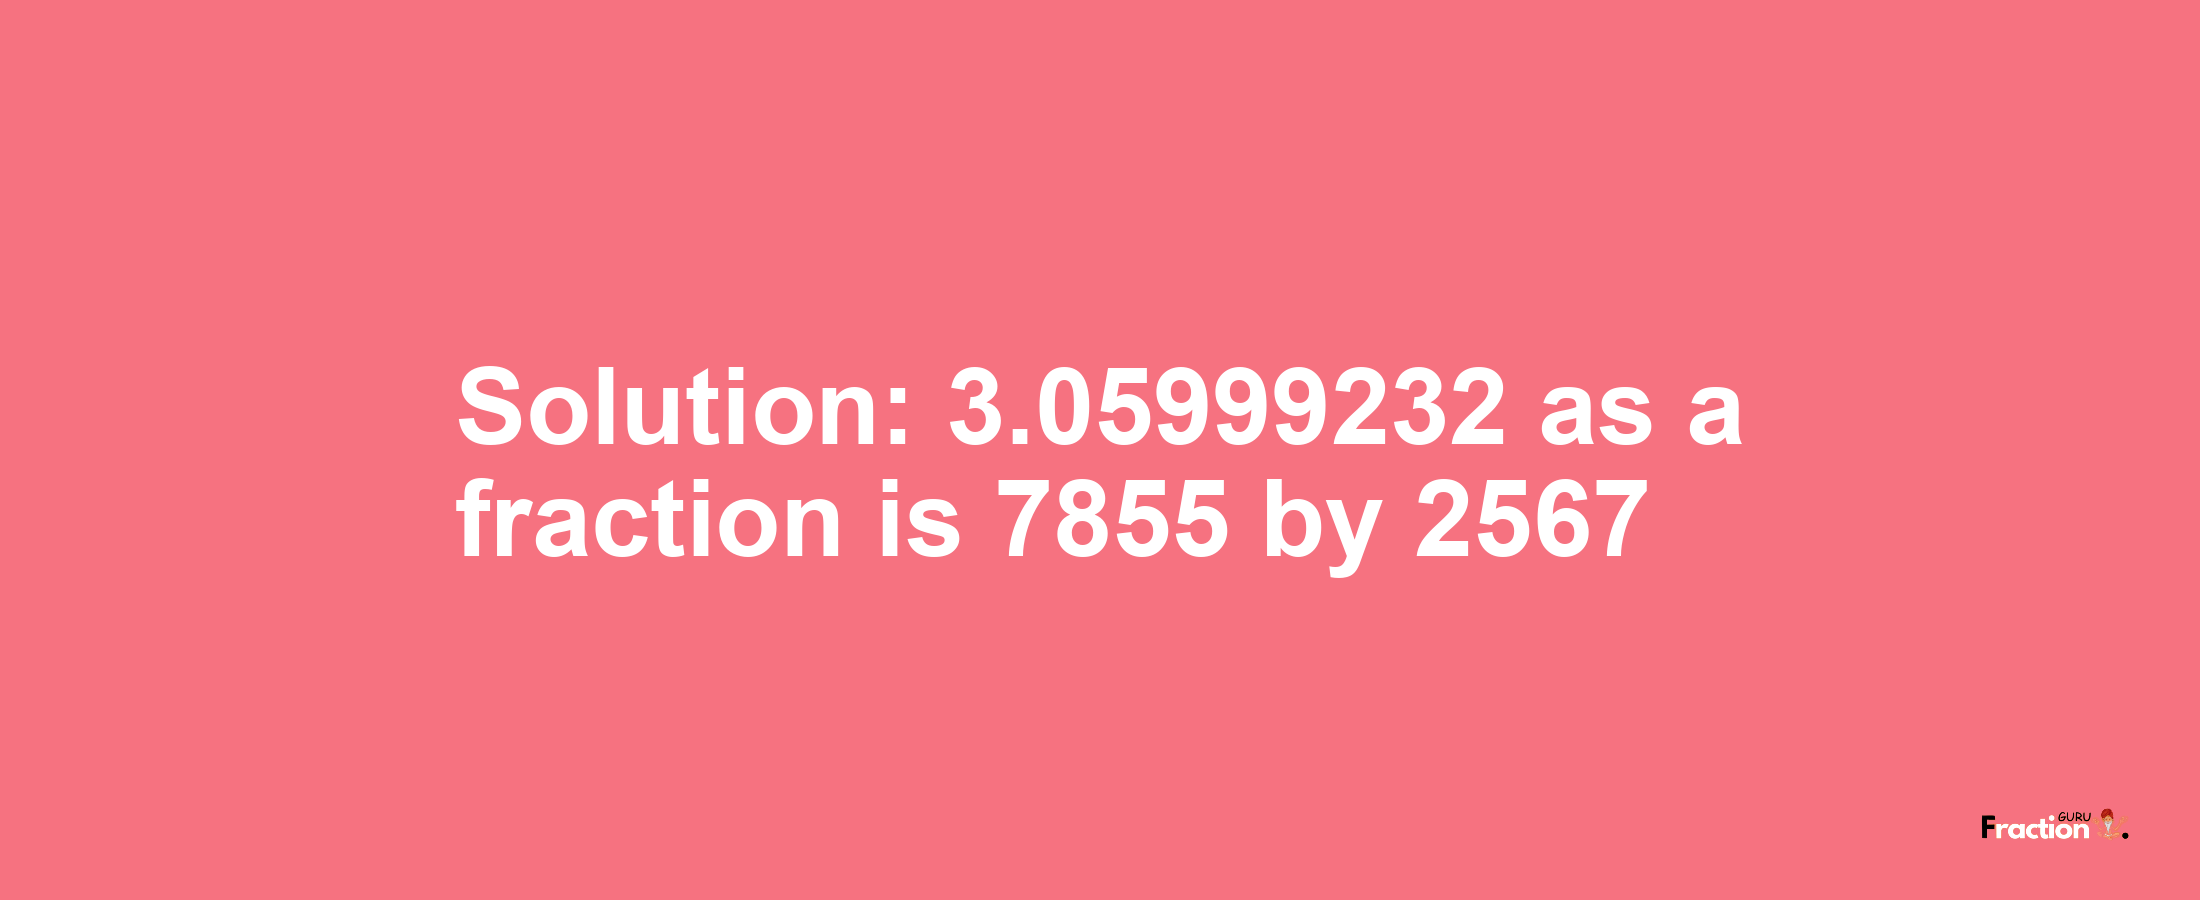 Solution:3.05999232 as a fraction is 7855/2567